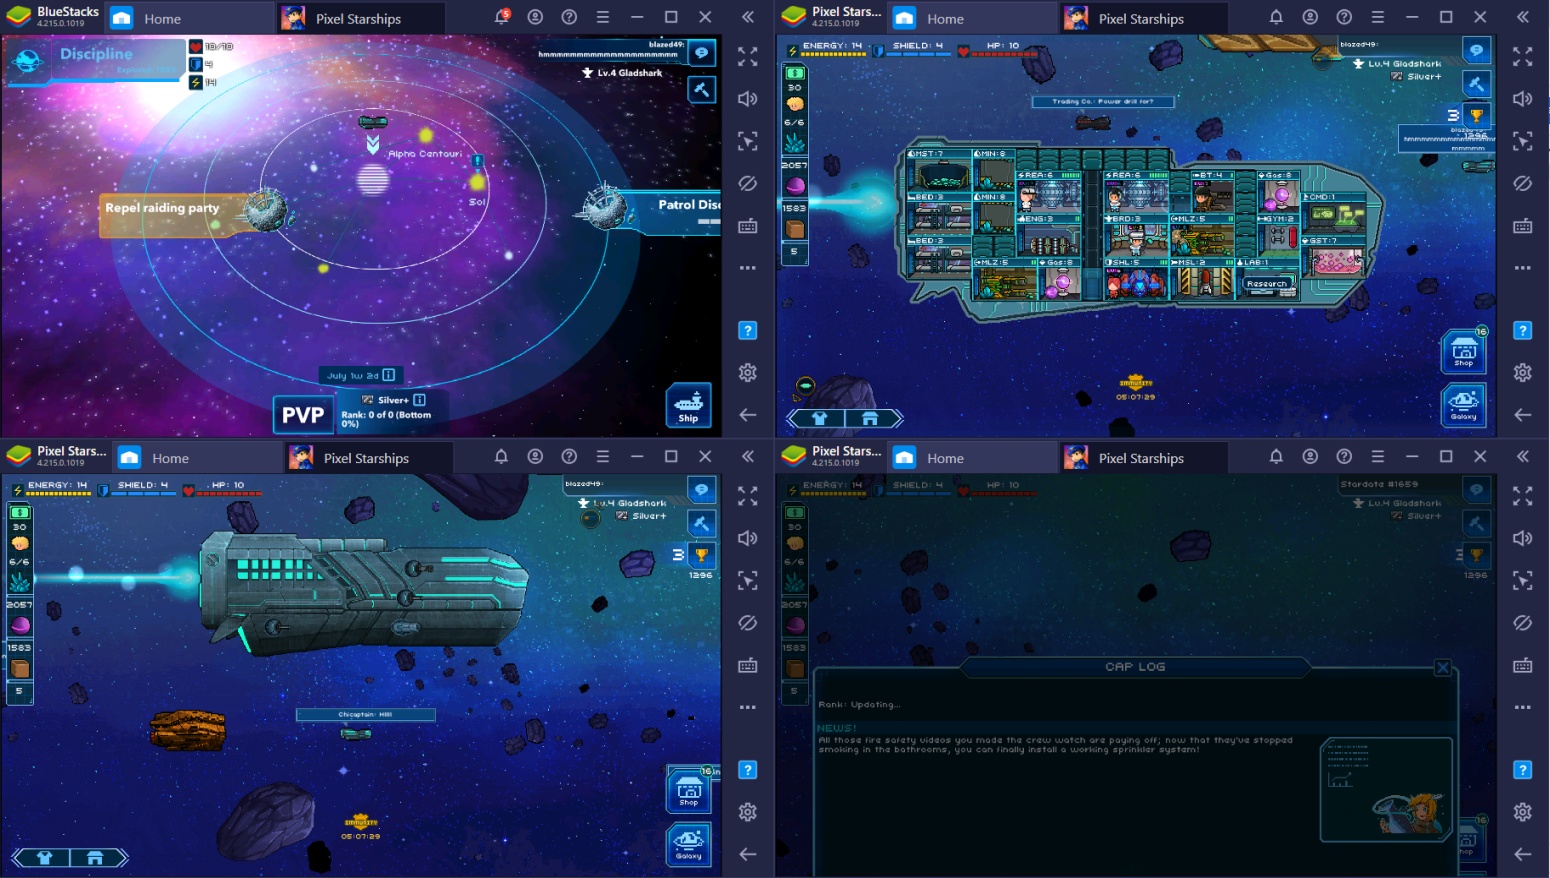 Setting Up Pixel Starships For Victory with BlueStacks on PC